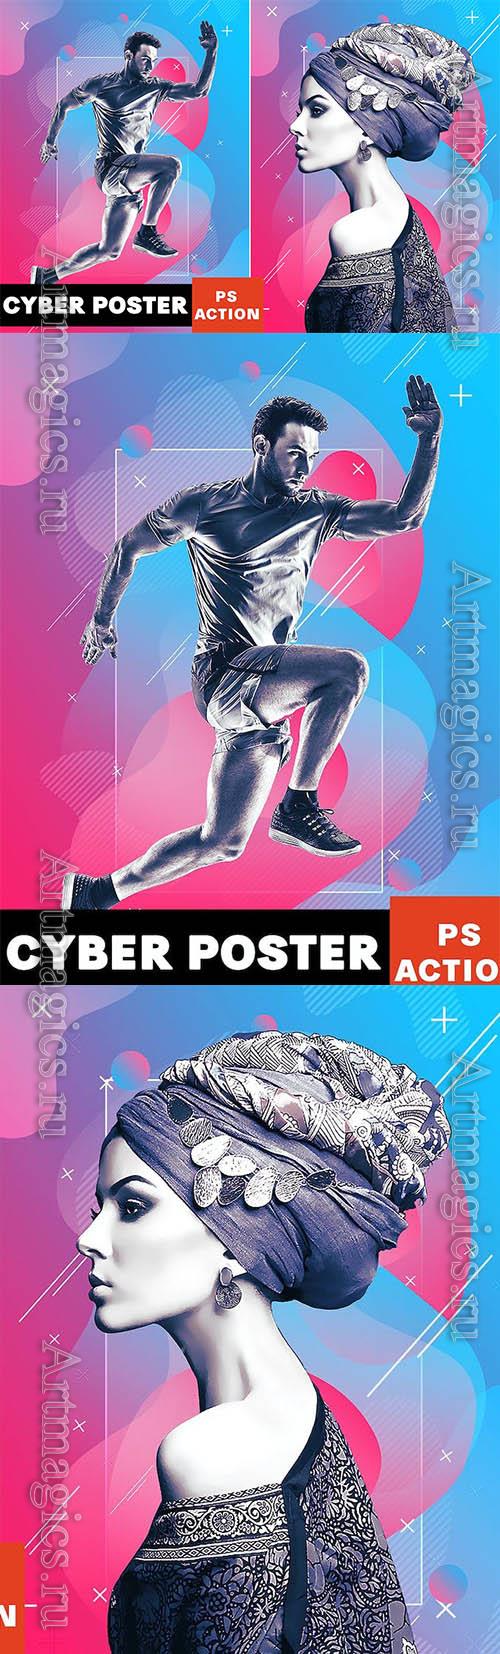 Cyber Poster Photoshop Action 2EPR8RZ